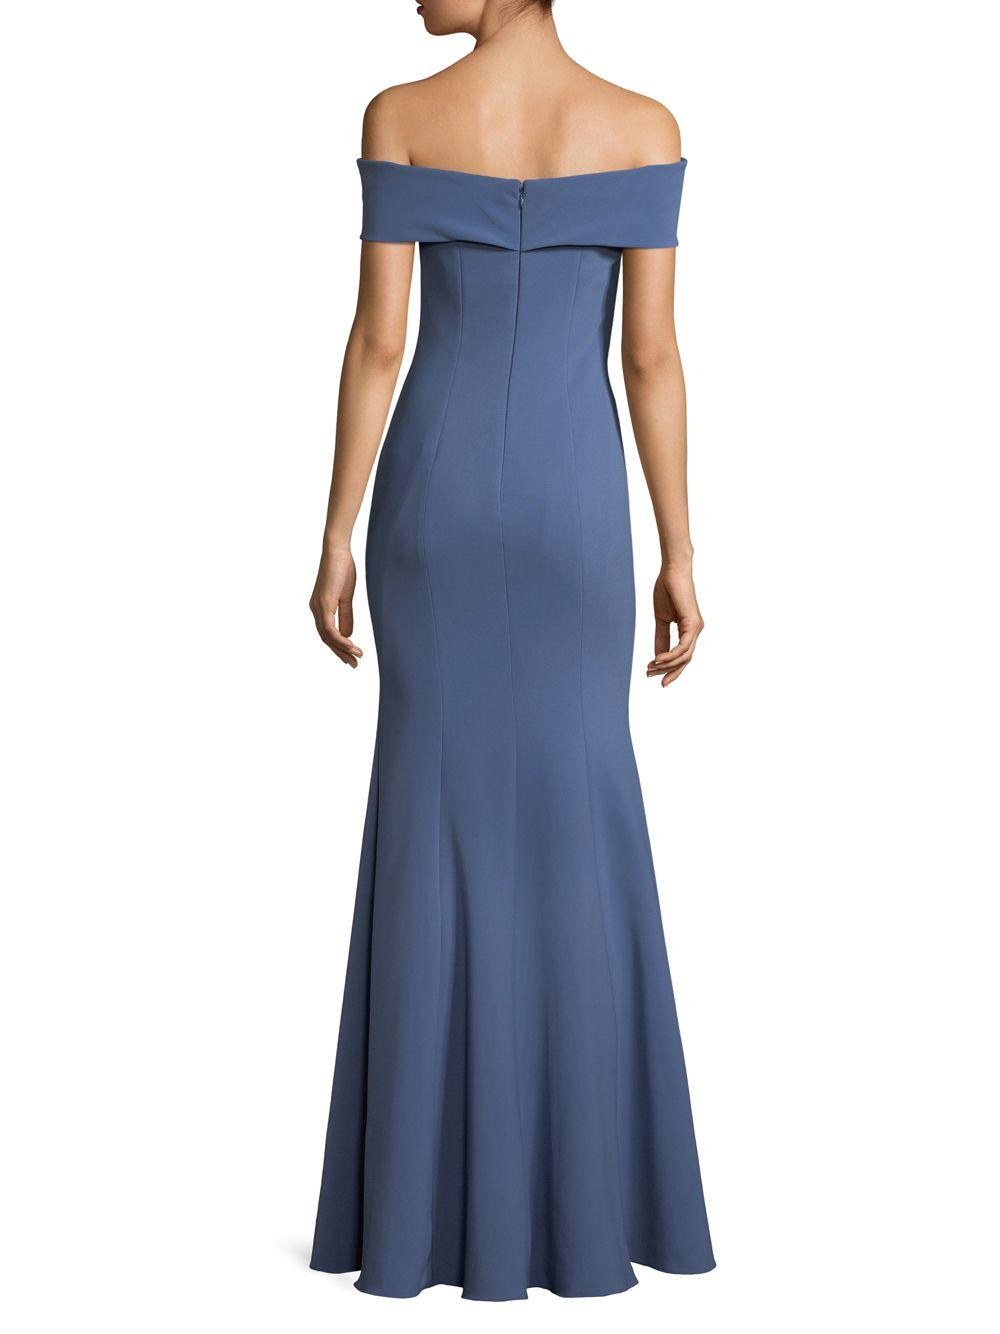 THEIA Off-the-shoulder Mermaid Gown in Blue - Lyst